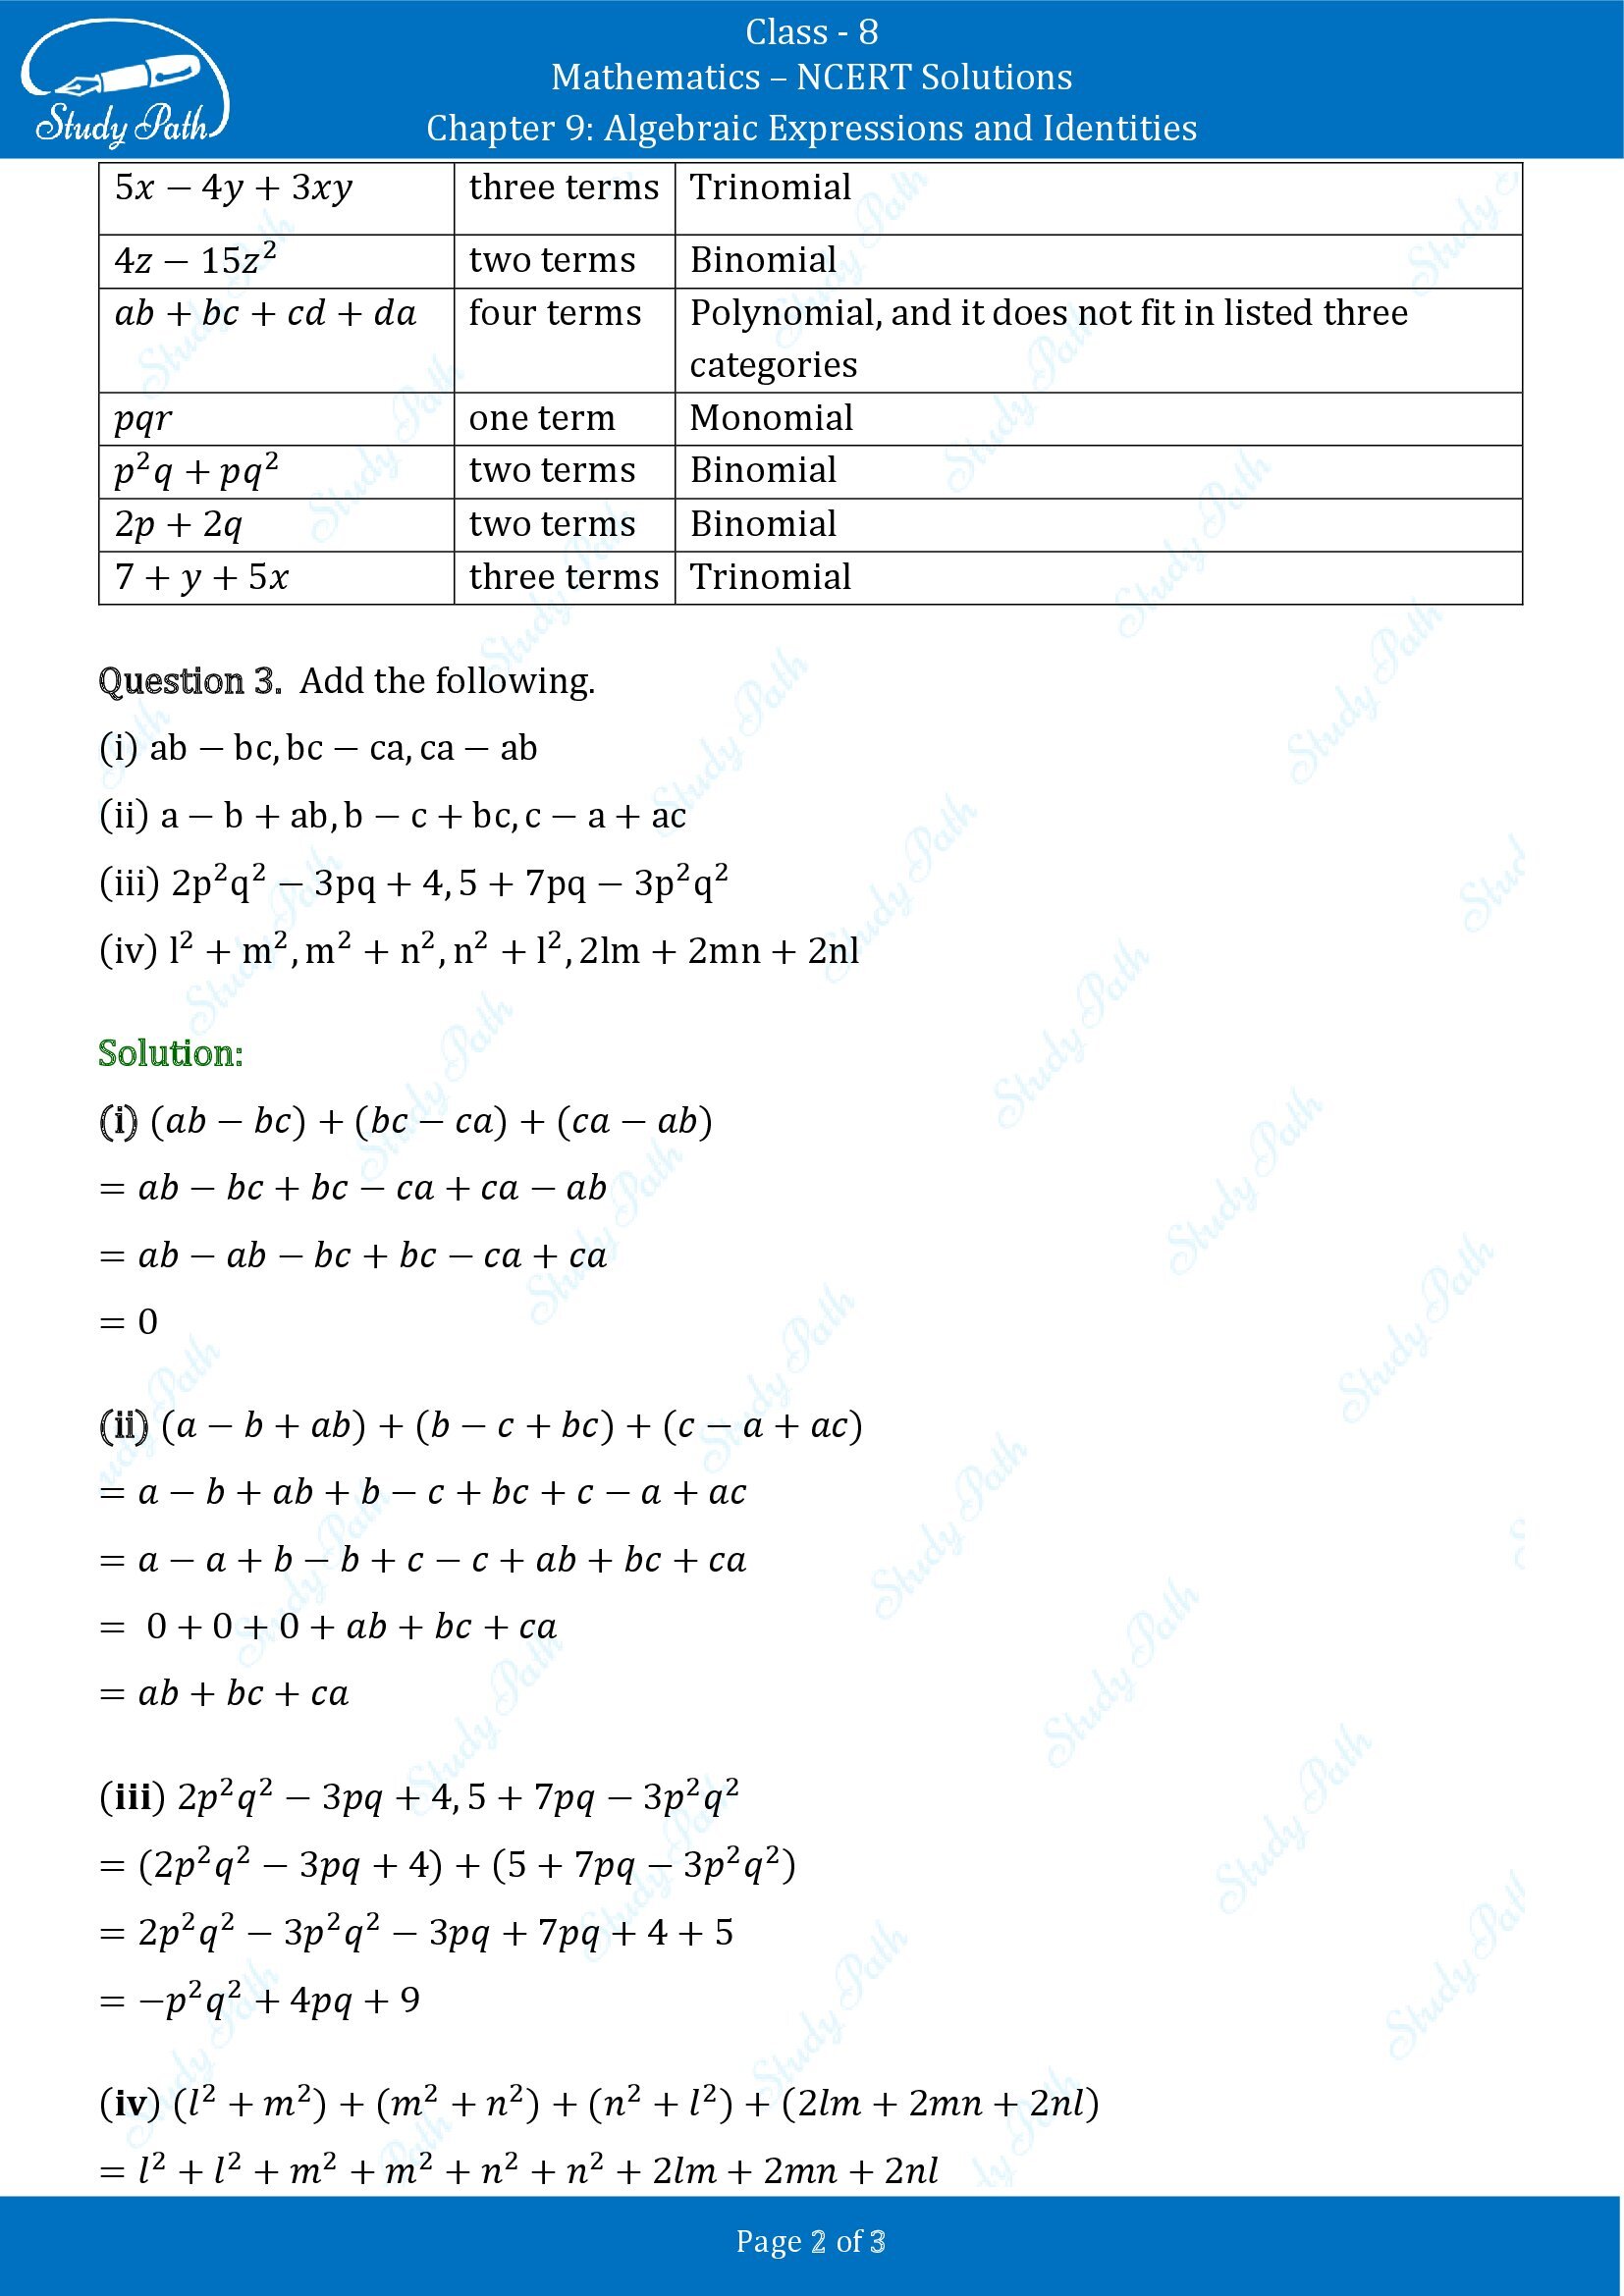 NCERT Solutions for Class 8 Maths Chapter 9 Algebraic Expressions and Identities Exercise 9.1 00002